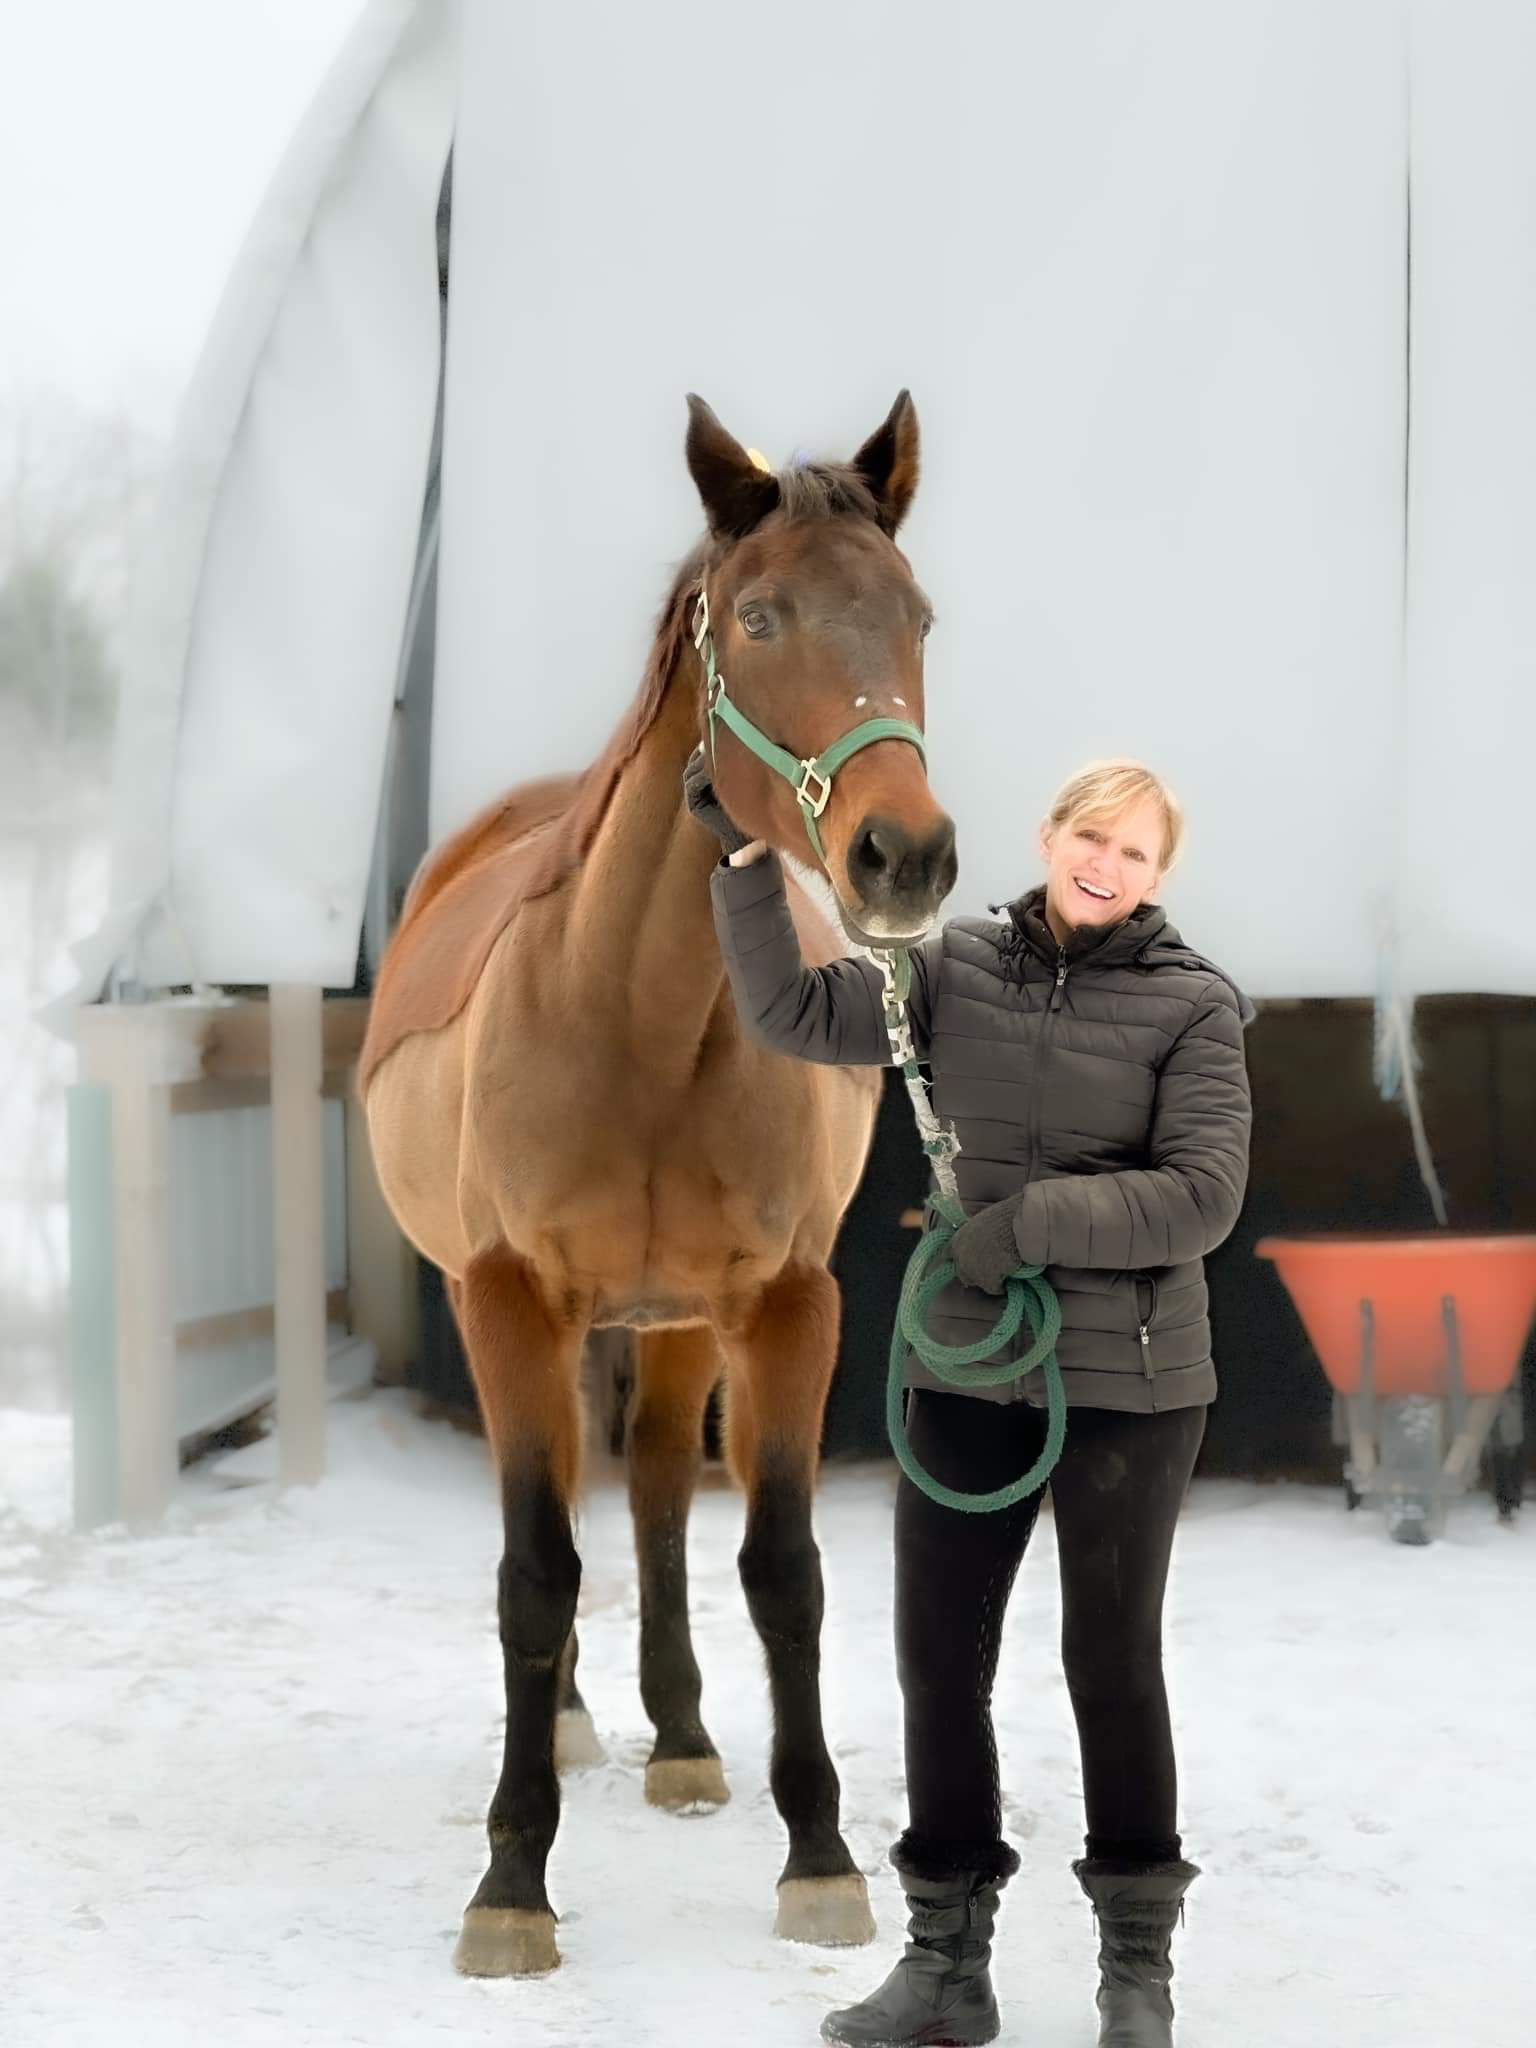 Beth standing next to a horse in the snow.